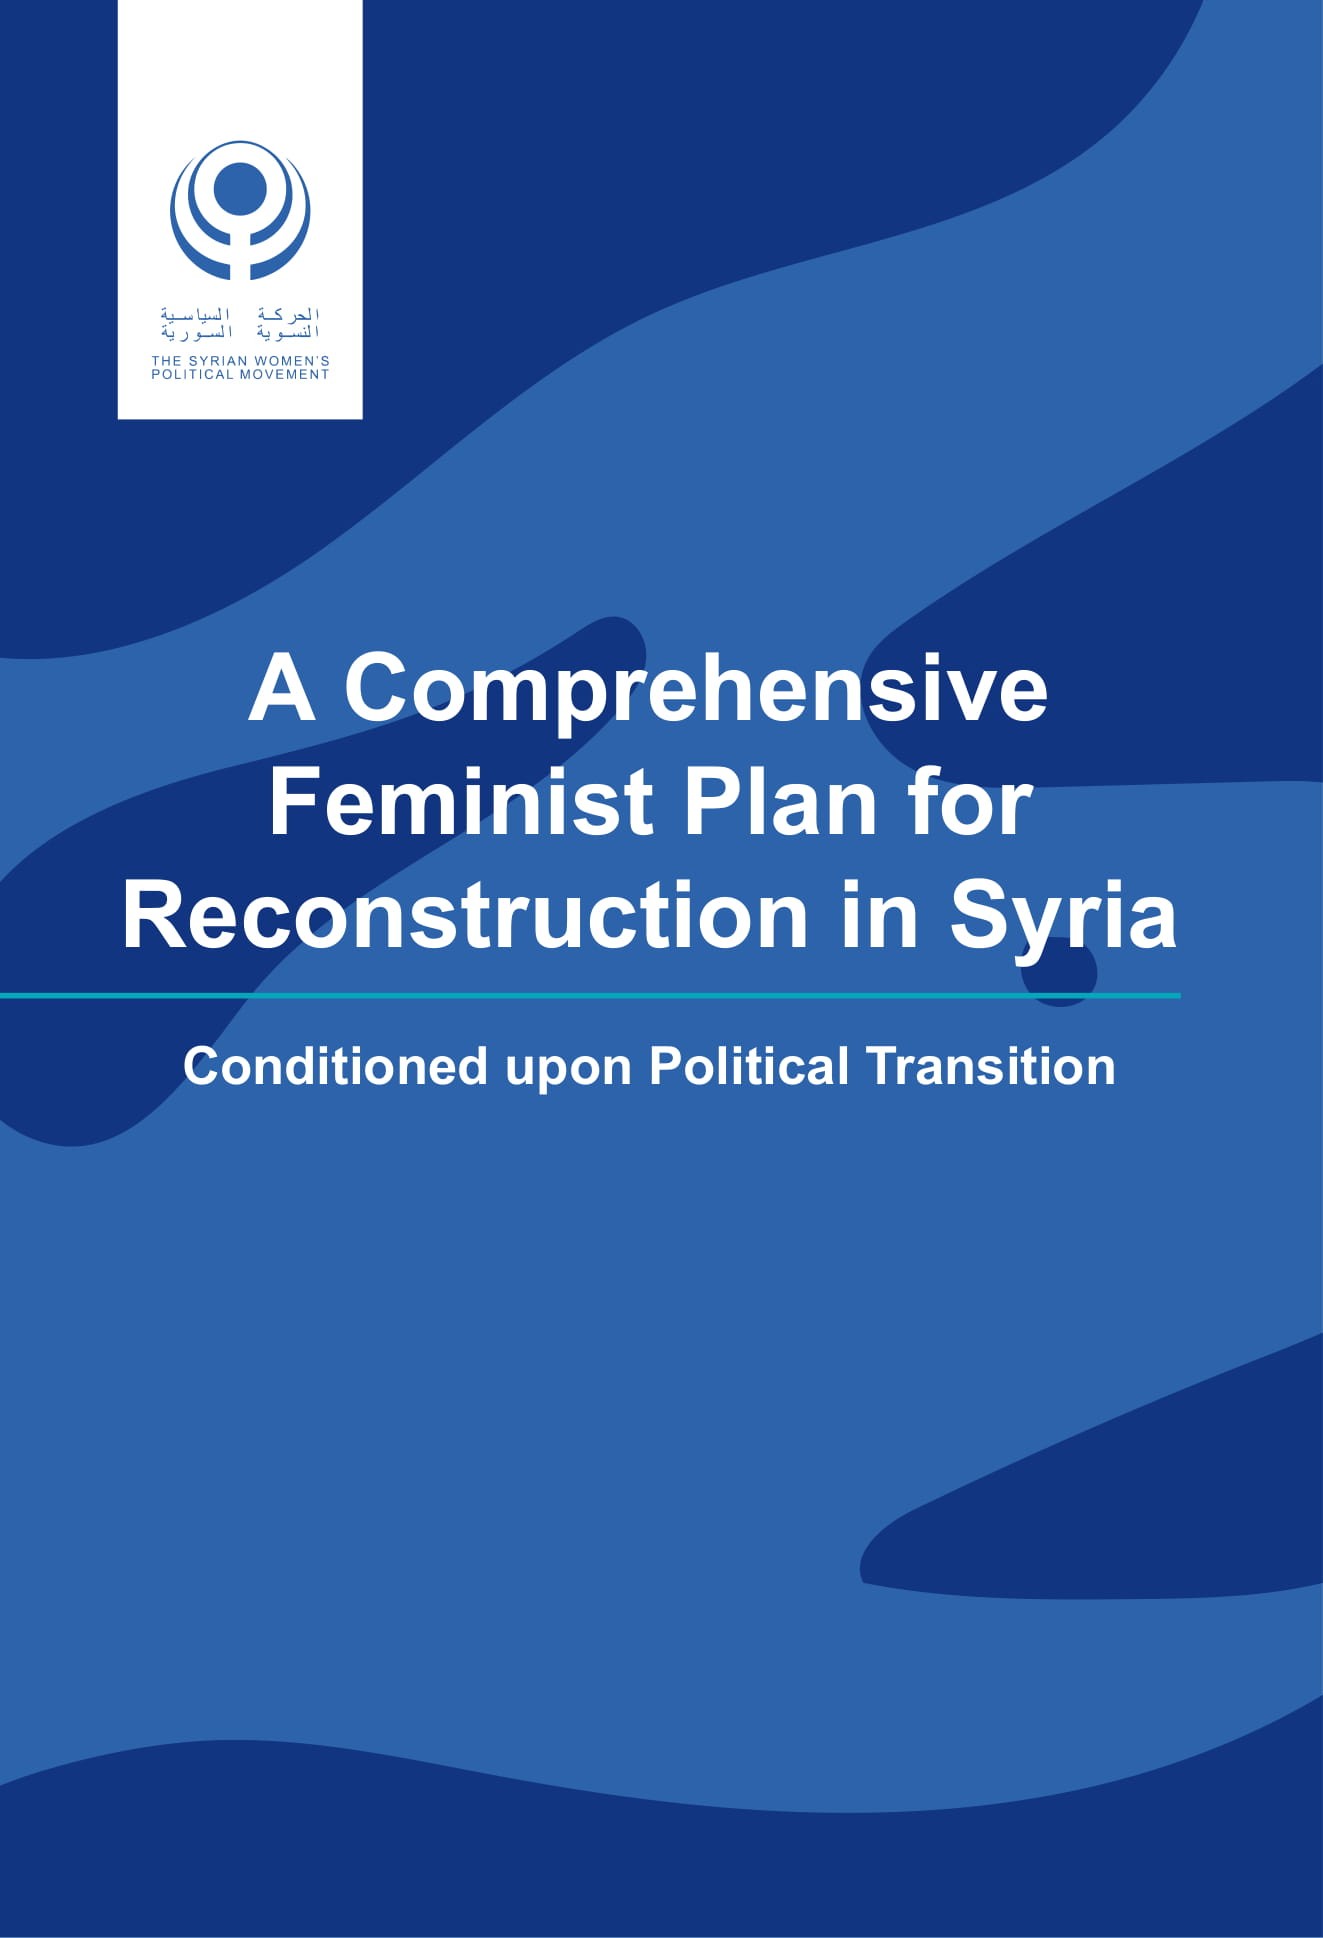 A Comprehensive Feminist Plan for Reconstruction in Syria with the condition of political transition